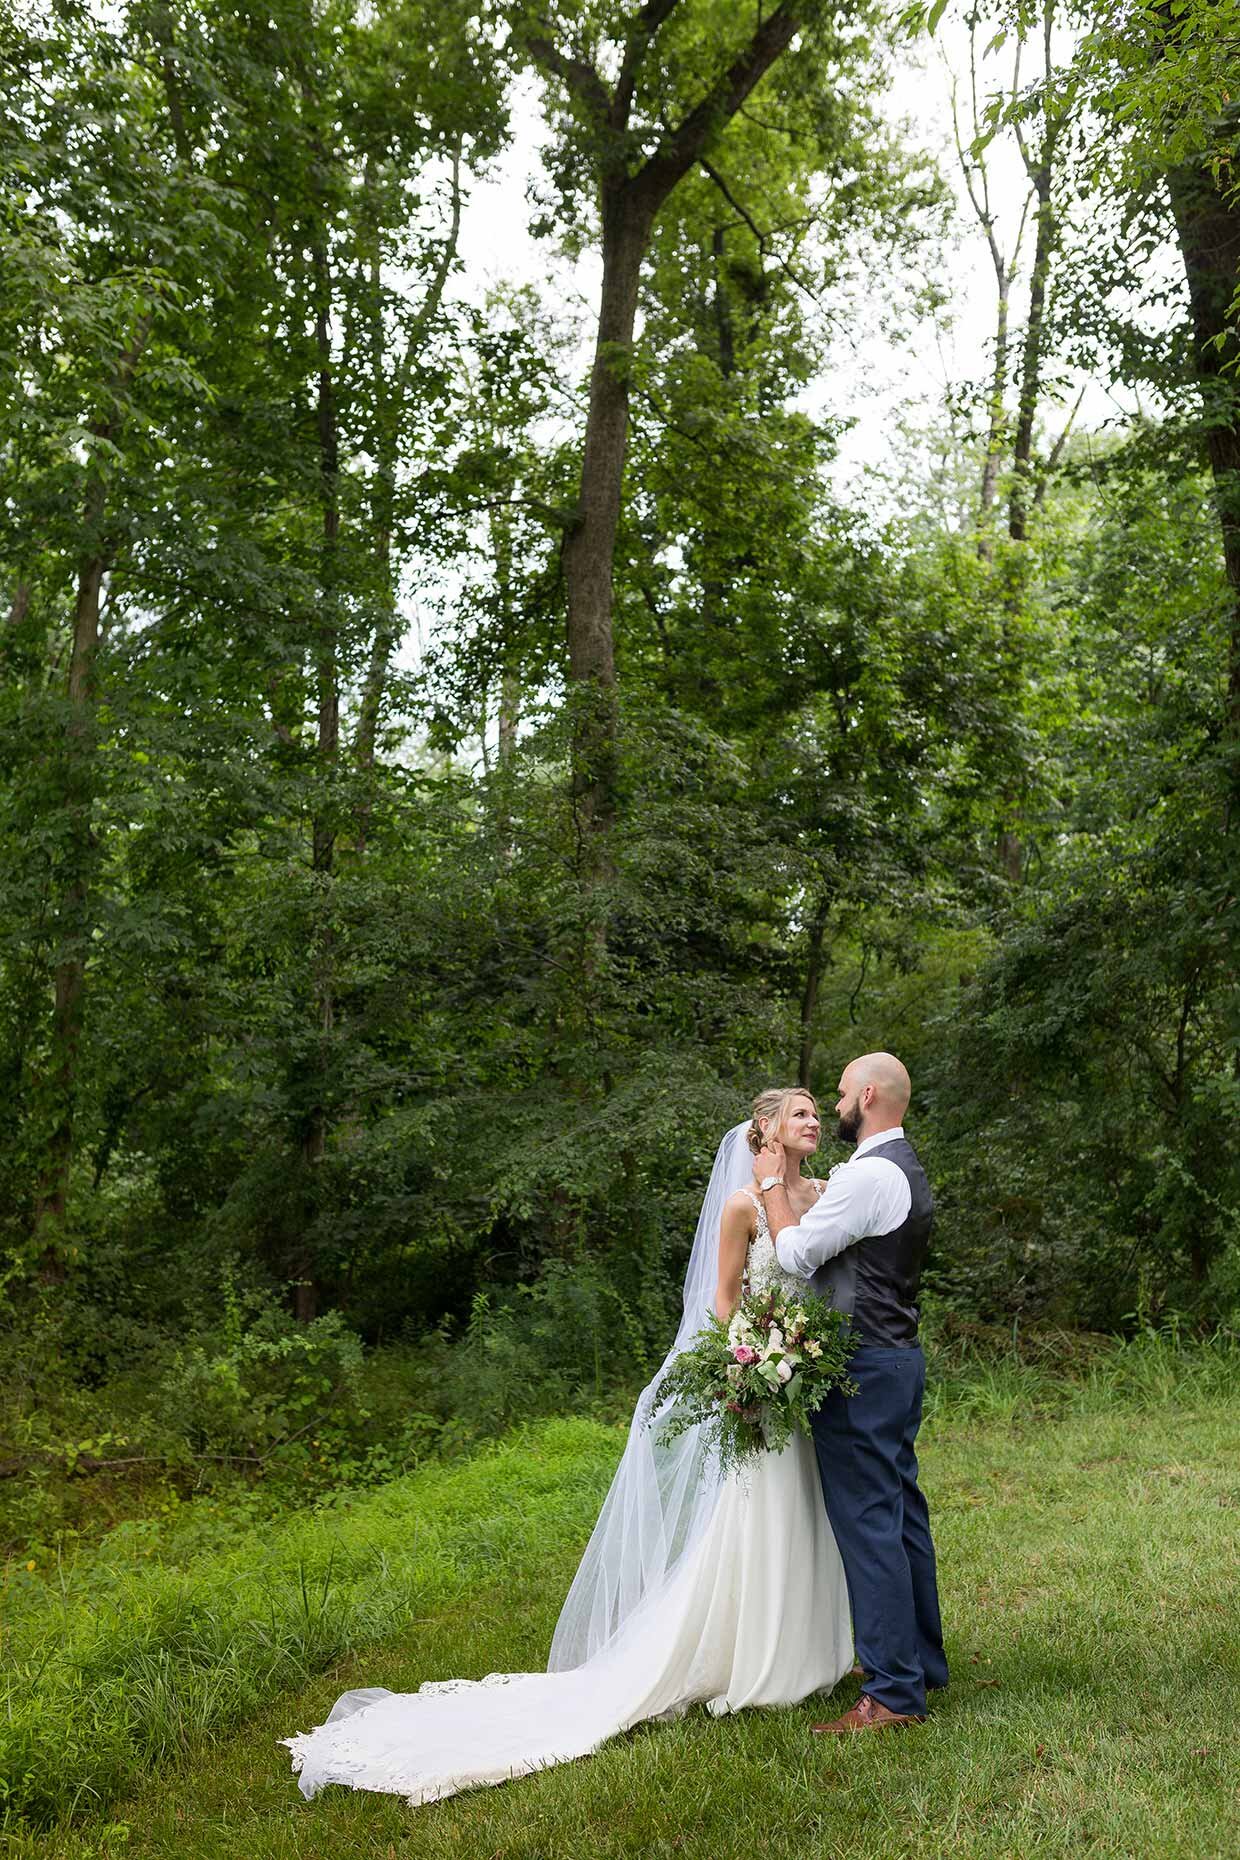 Bride and groom in a forest looking at each other